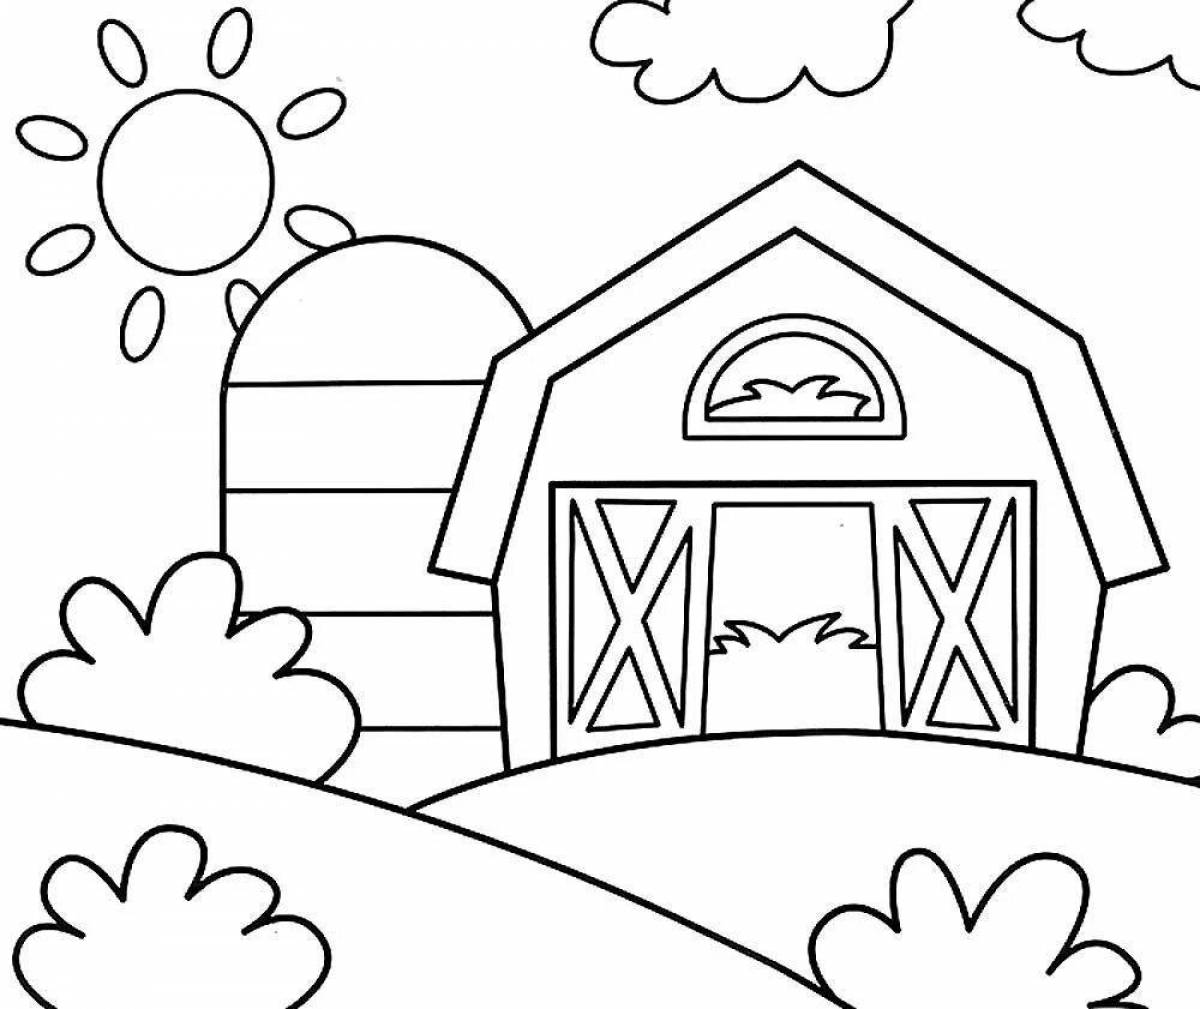 Coloring book shining educational house